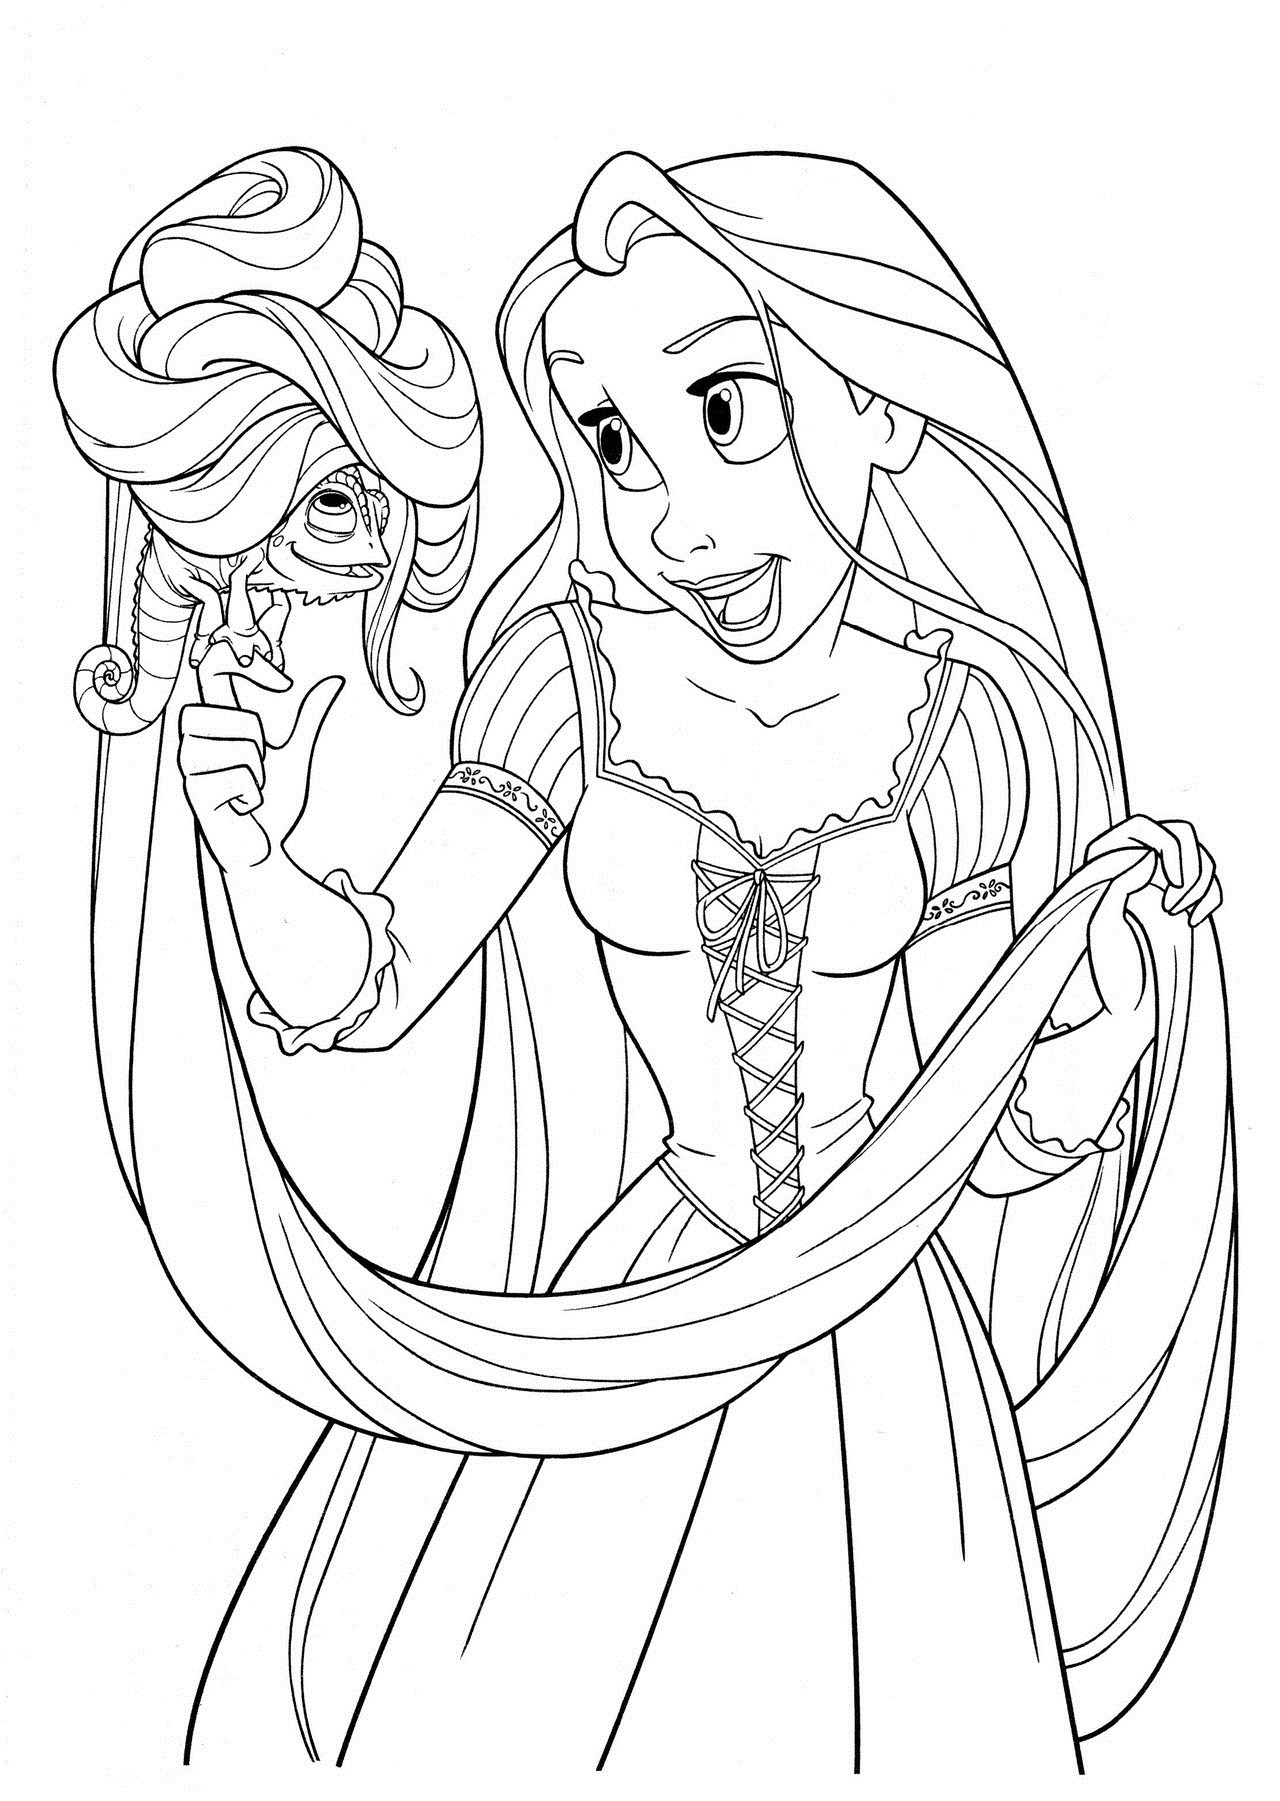 Printable Coloring Pages For Toddlers Free
 Free Printable Tangled Coloring Pages For Kids